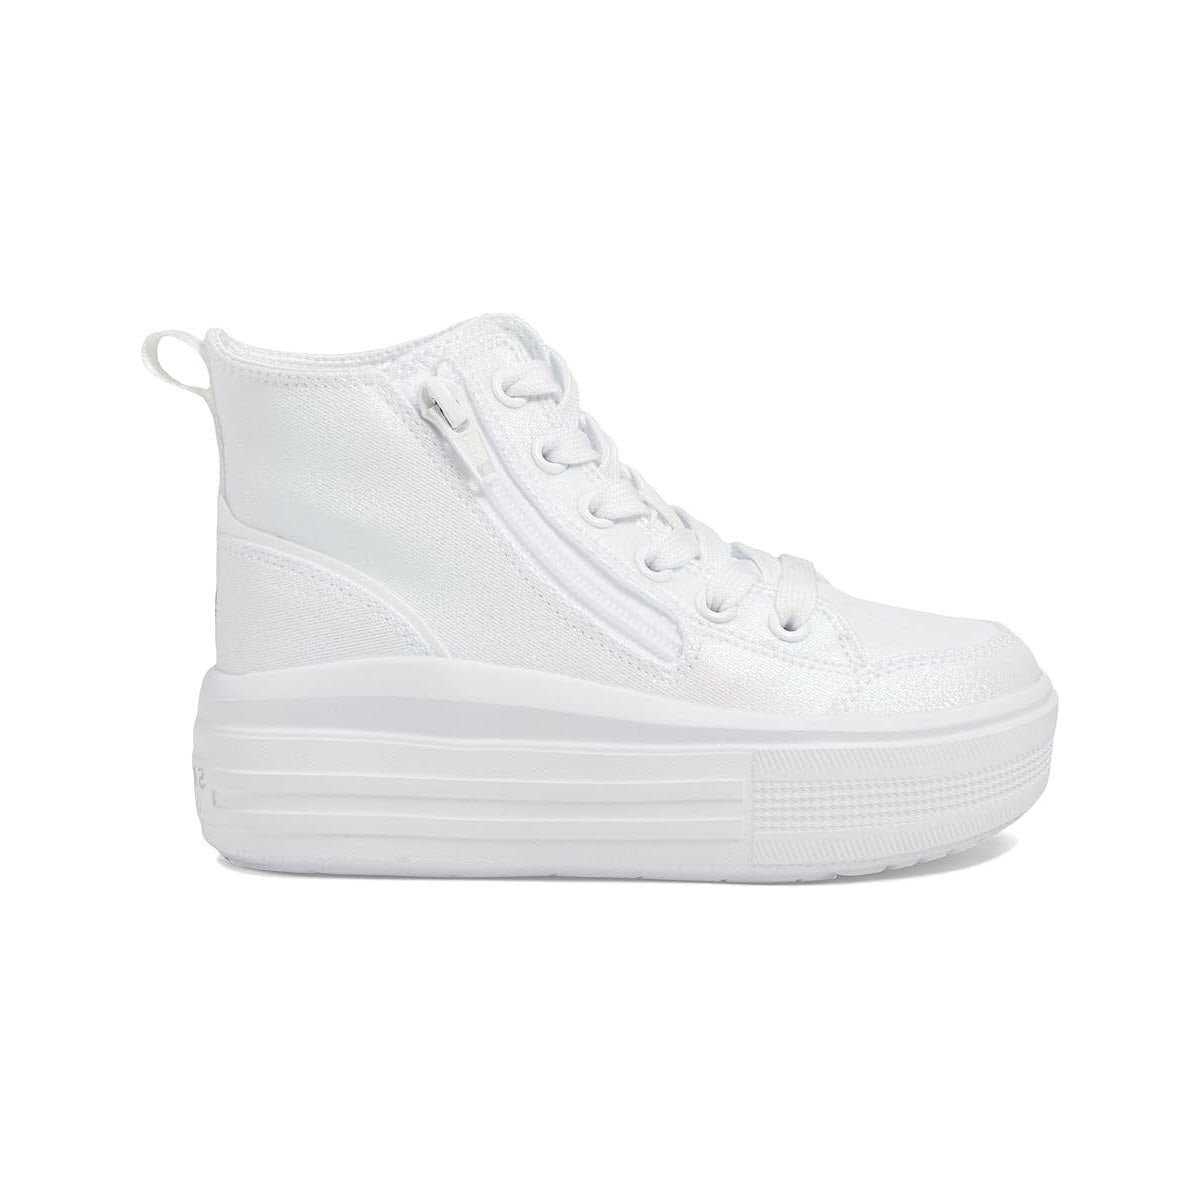 A white high-top fashion sneaker with a zipper, Skechers HYPERLIFT WHITE - KIDS.